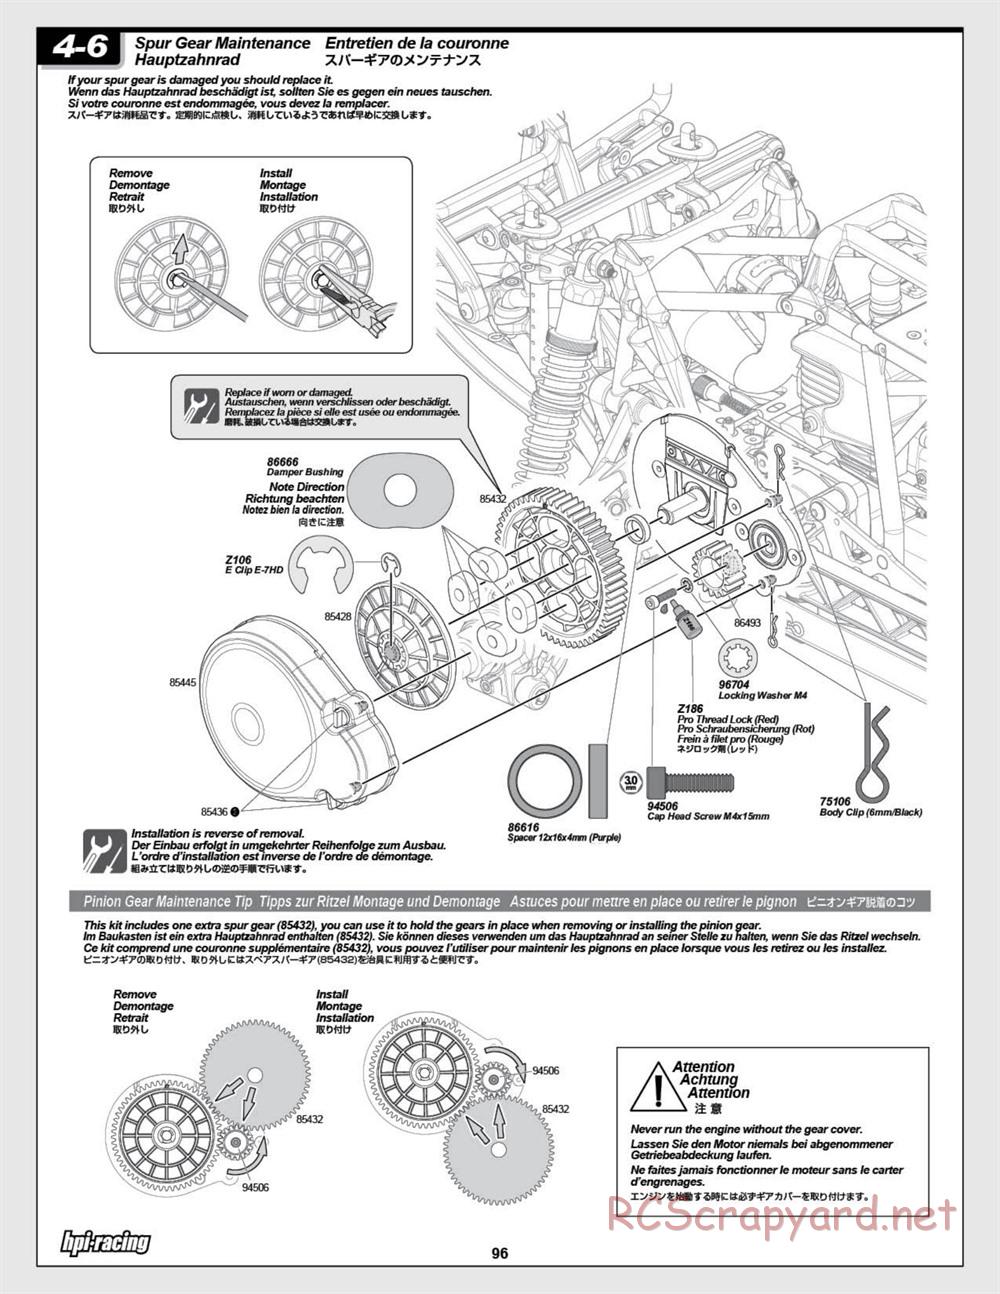 HPI - Baja 5SC SS - Exploded View - Page 96